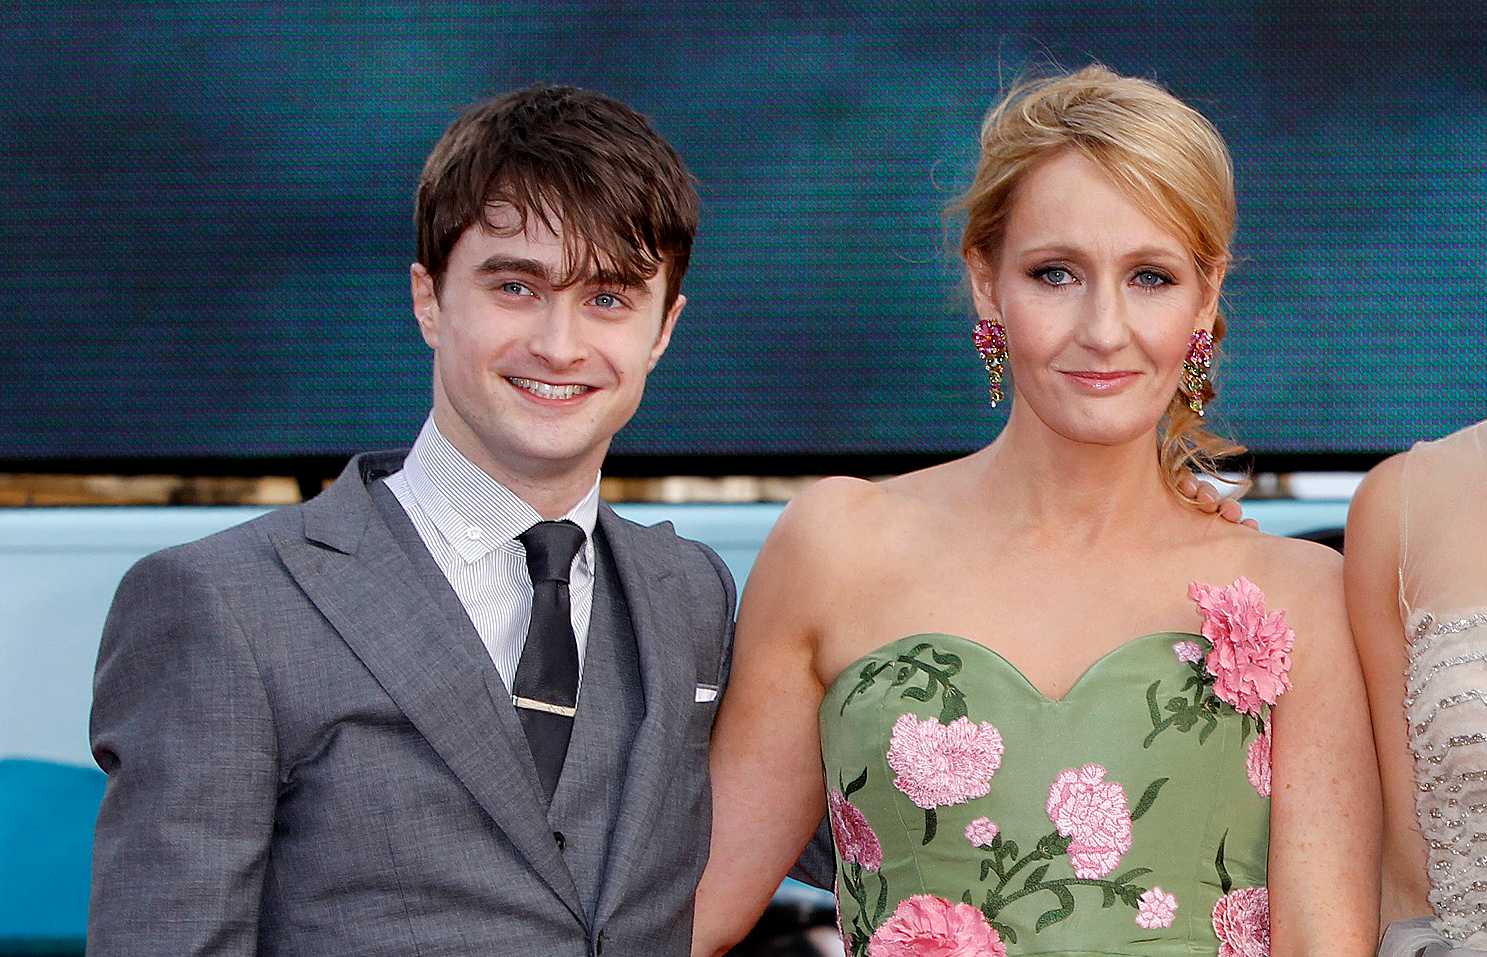 From Hogwarts to human rights: How Harry Potter stars defended trans equality